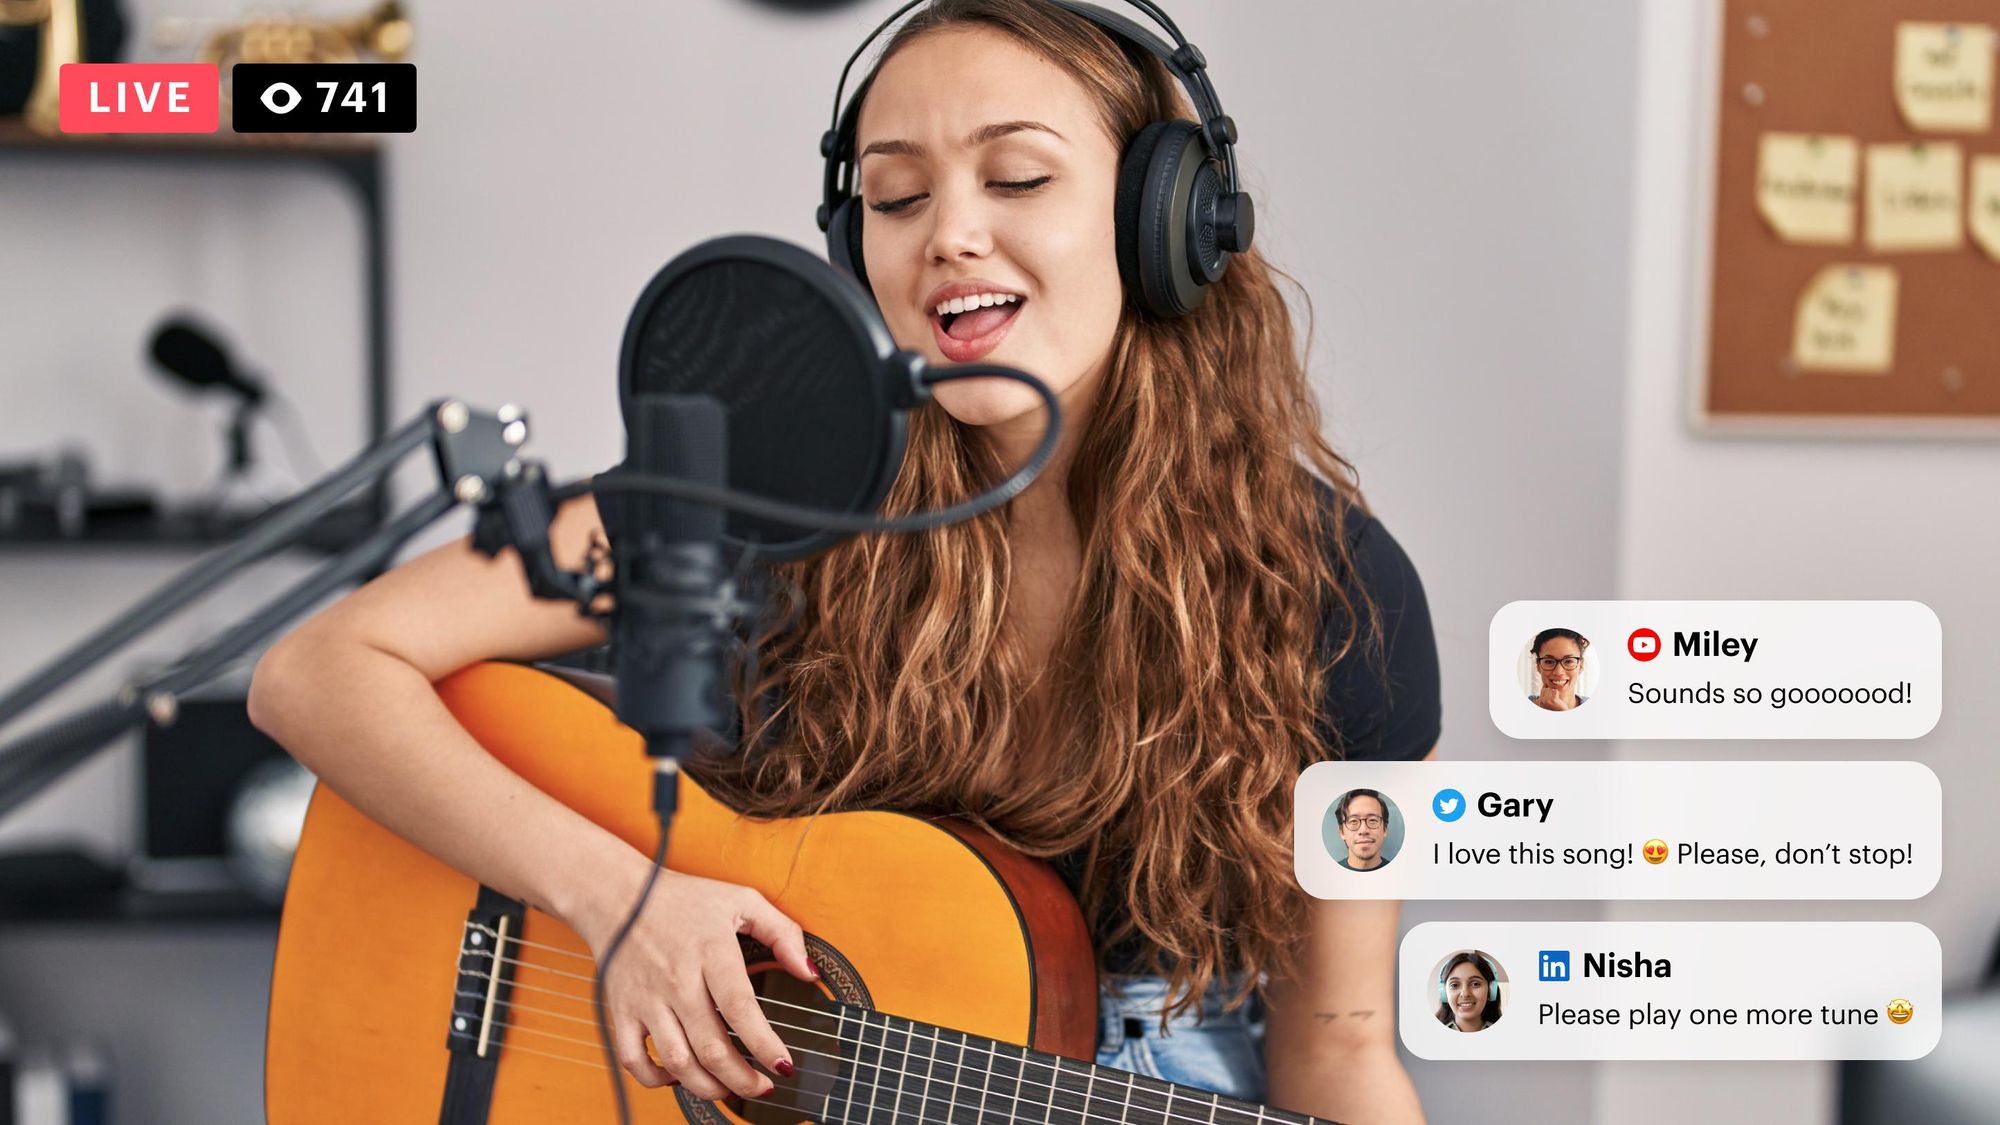 How to live stream your music: a full guide for musicians